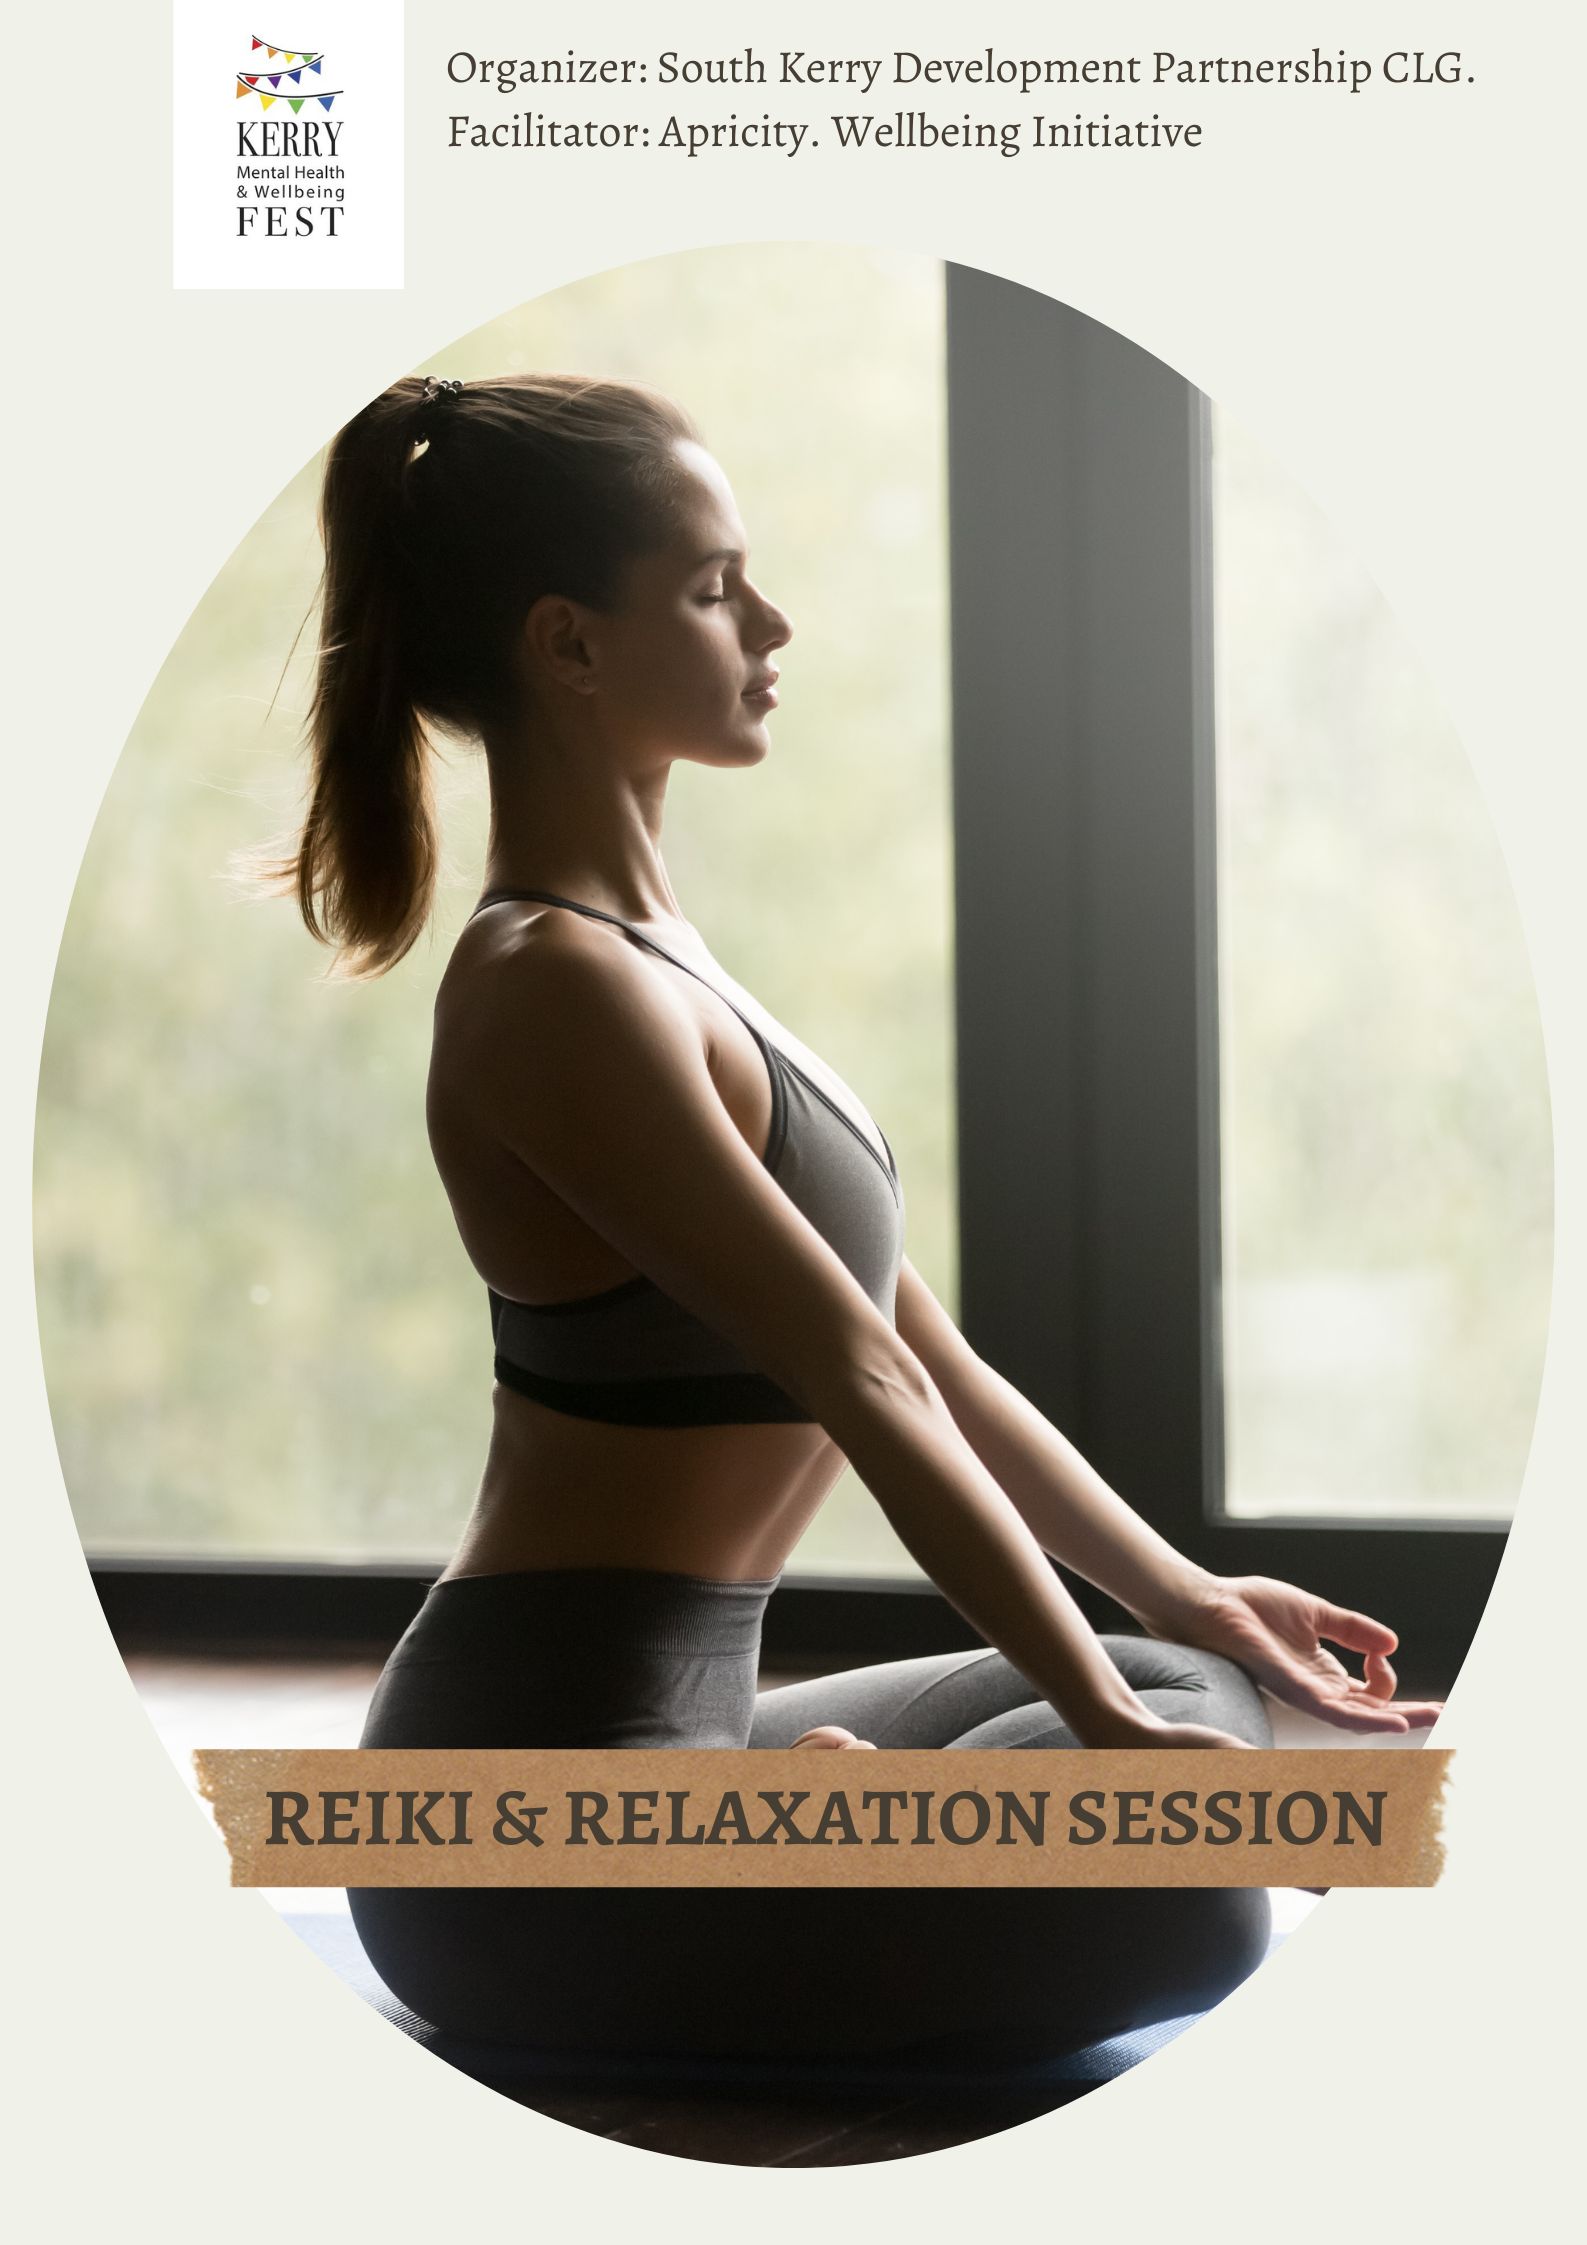 Reiki & Relaxation Session event at Kerry Mental Health & Wellbeing Fest 2022